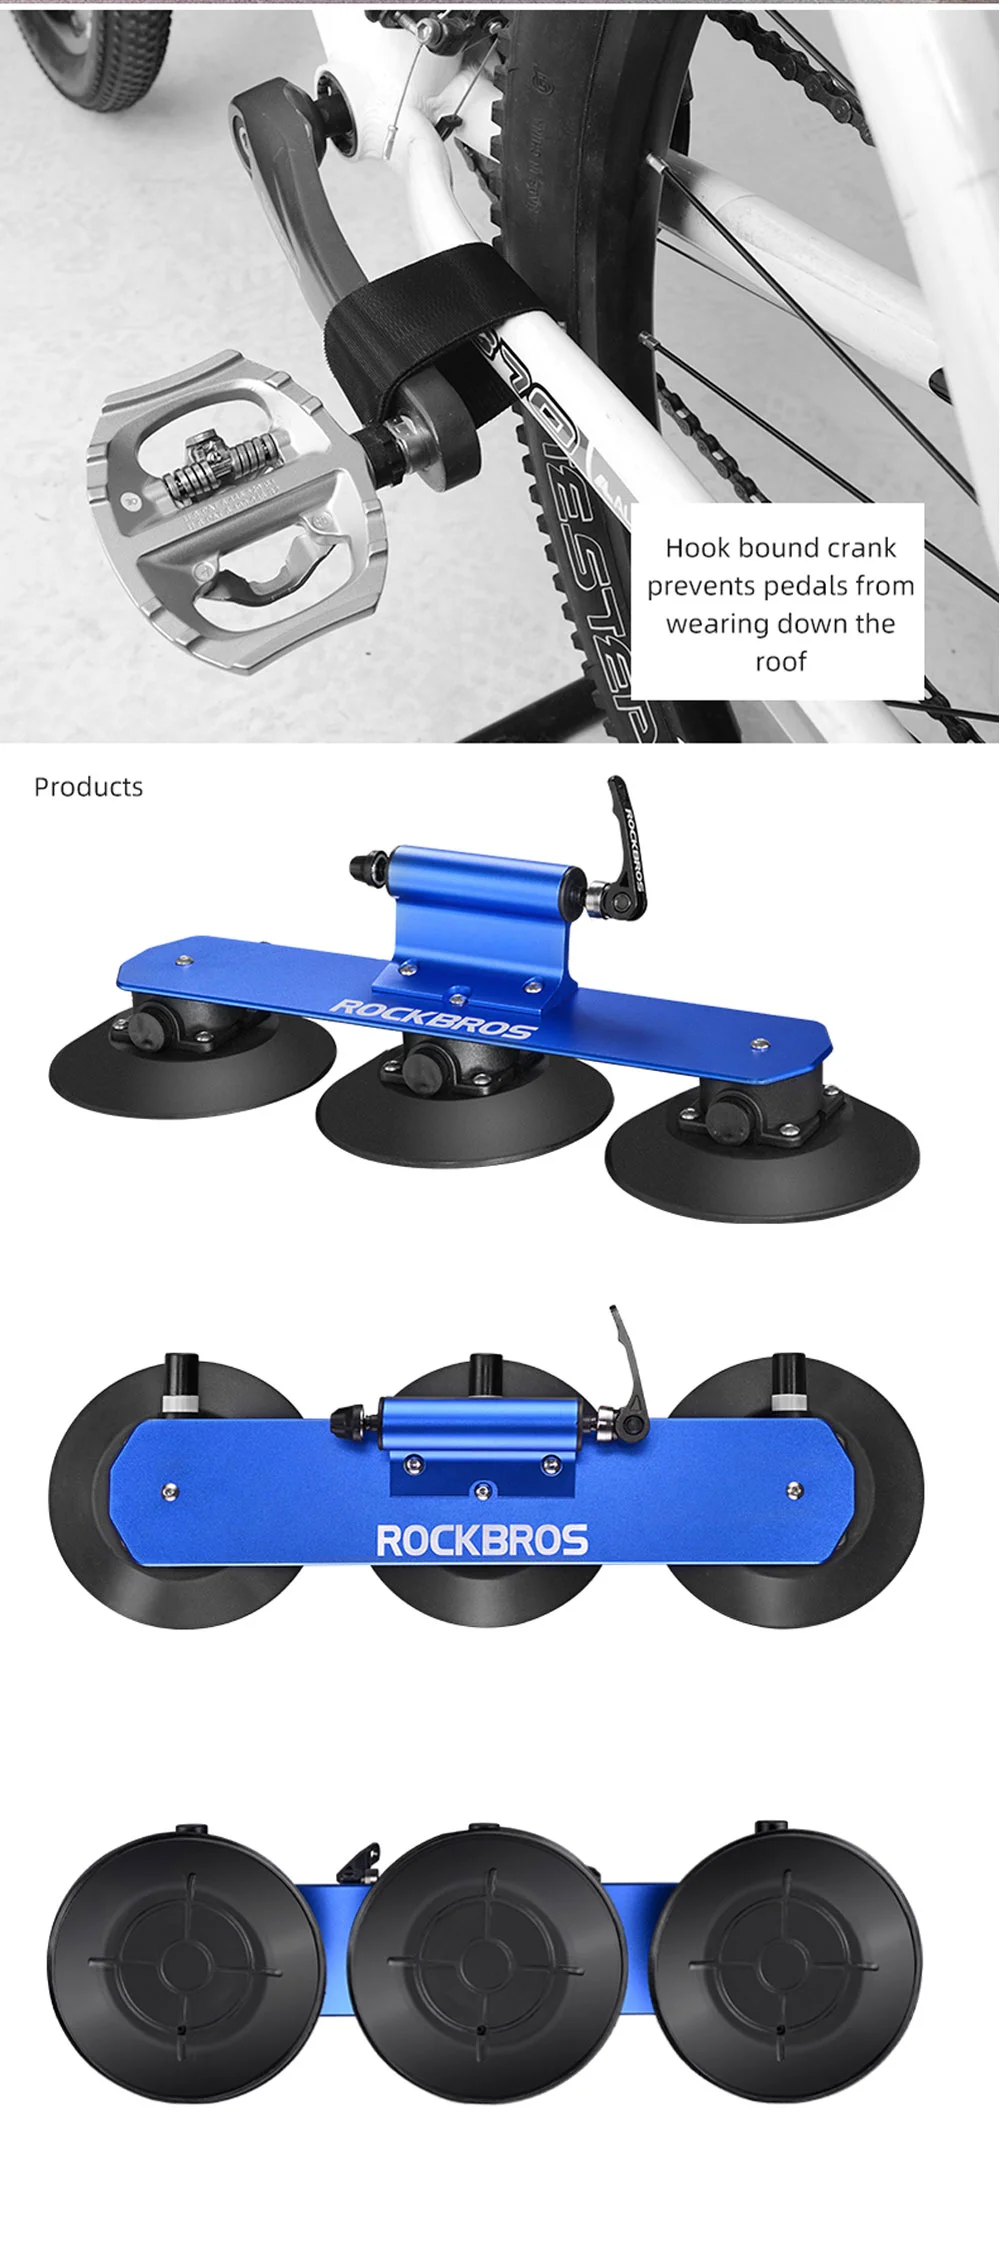 Rockbros Bicycle Rack, Bicycle Accessories, Roof Suction Cup Rack, Roof Travel Rack